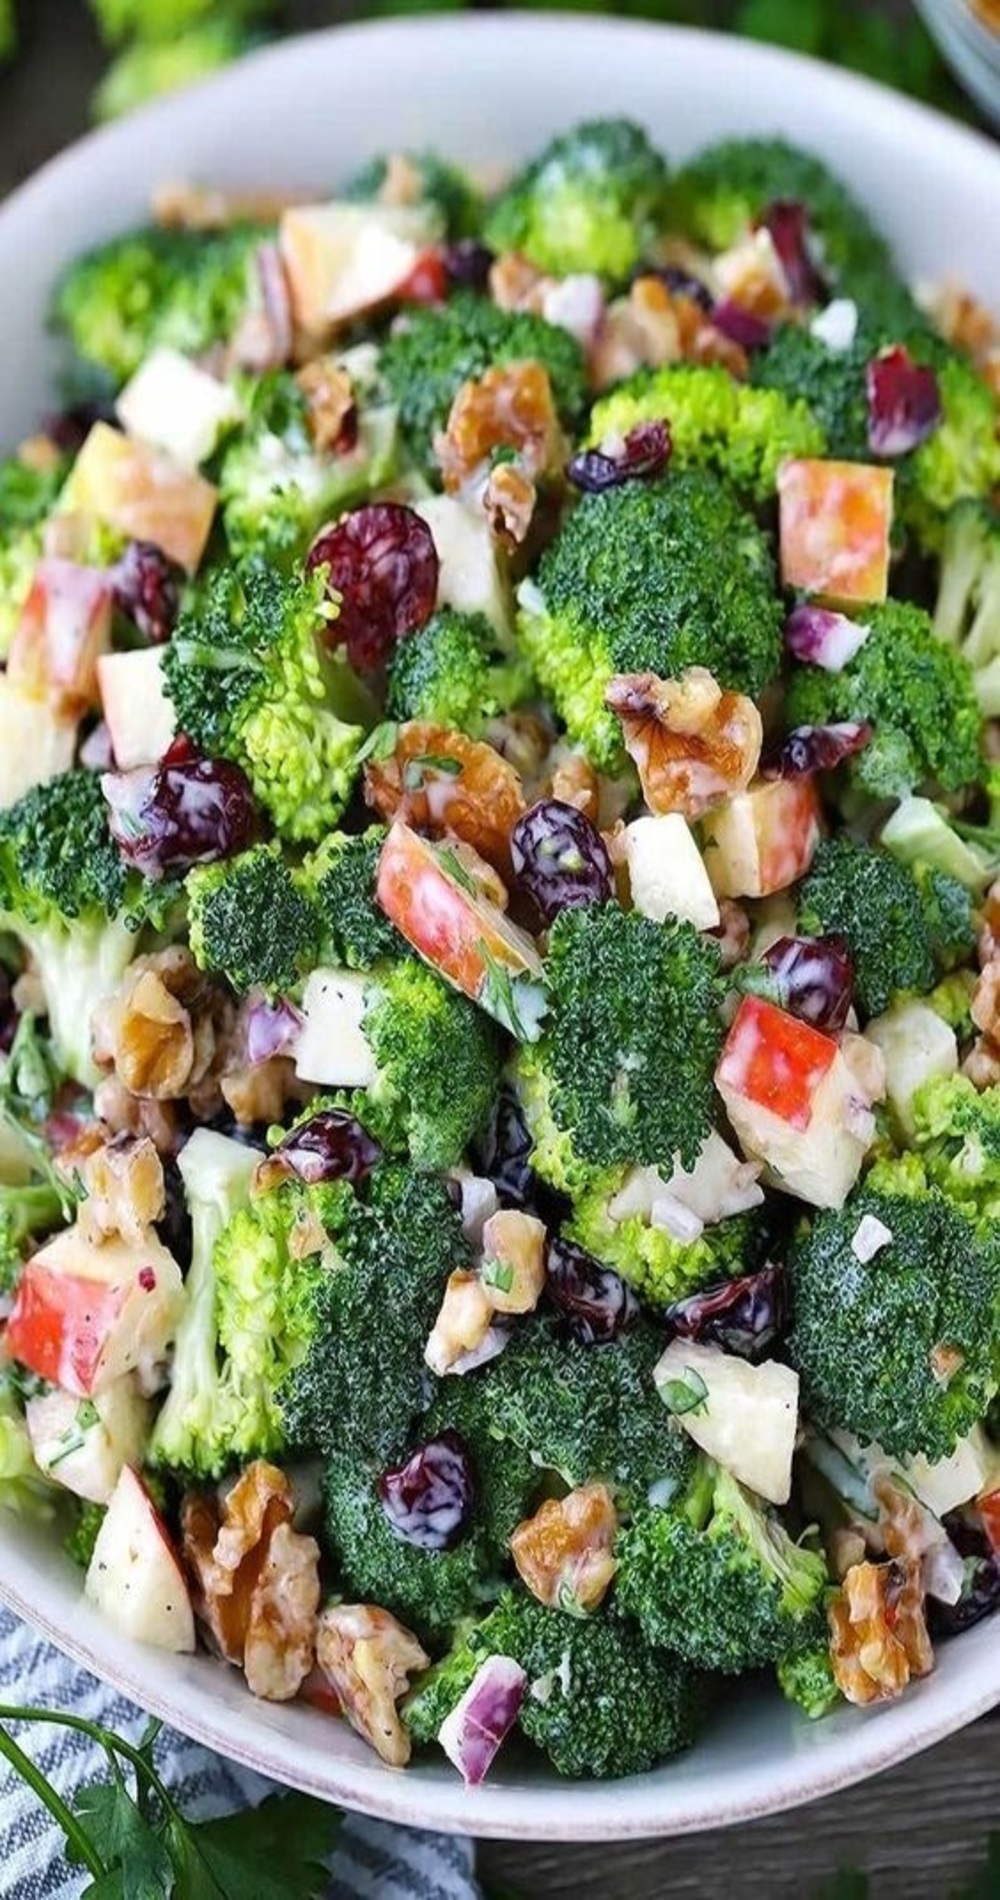 Broccoli Salad with Apples, Walnuts, and Cranberries